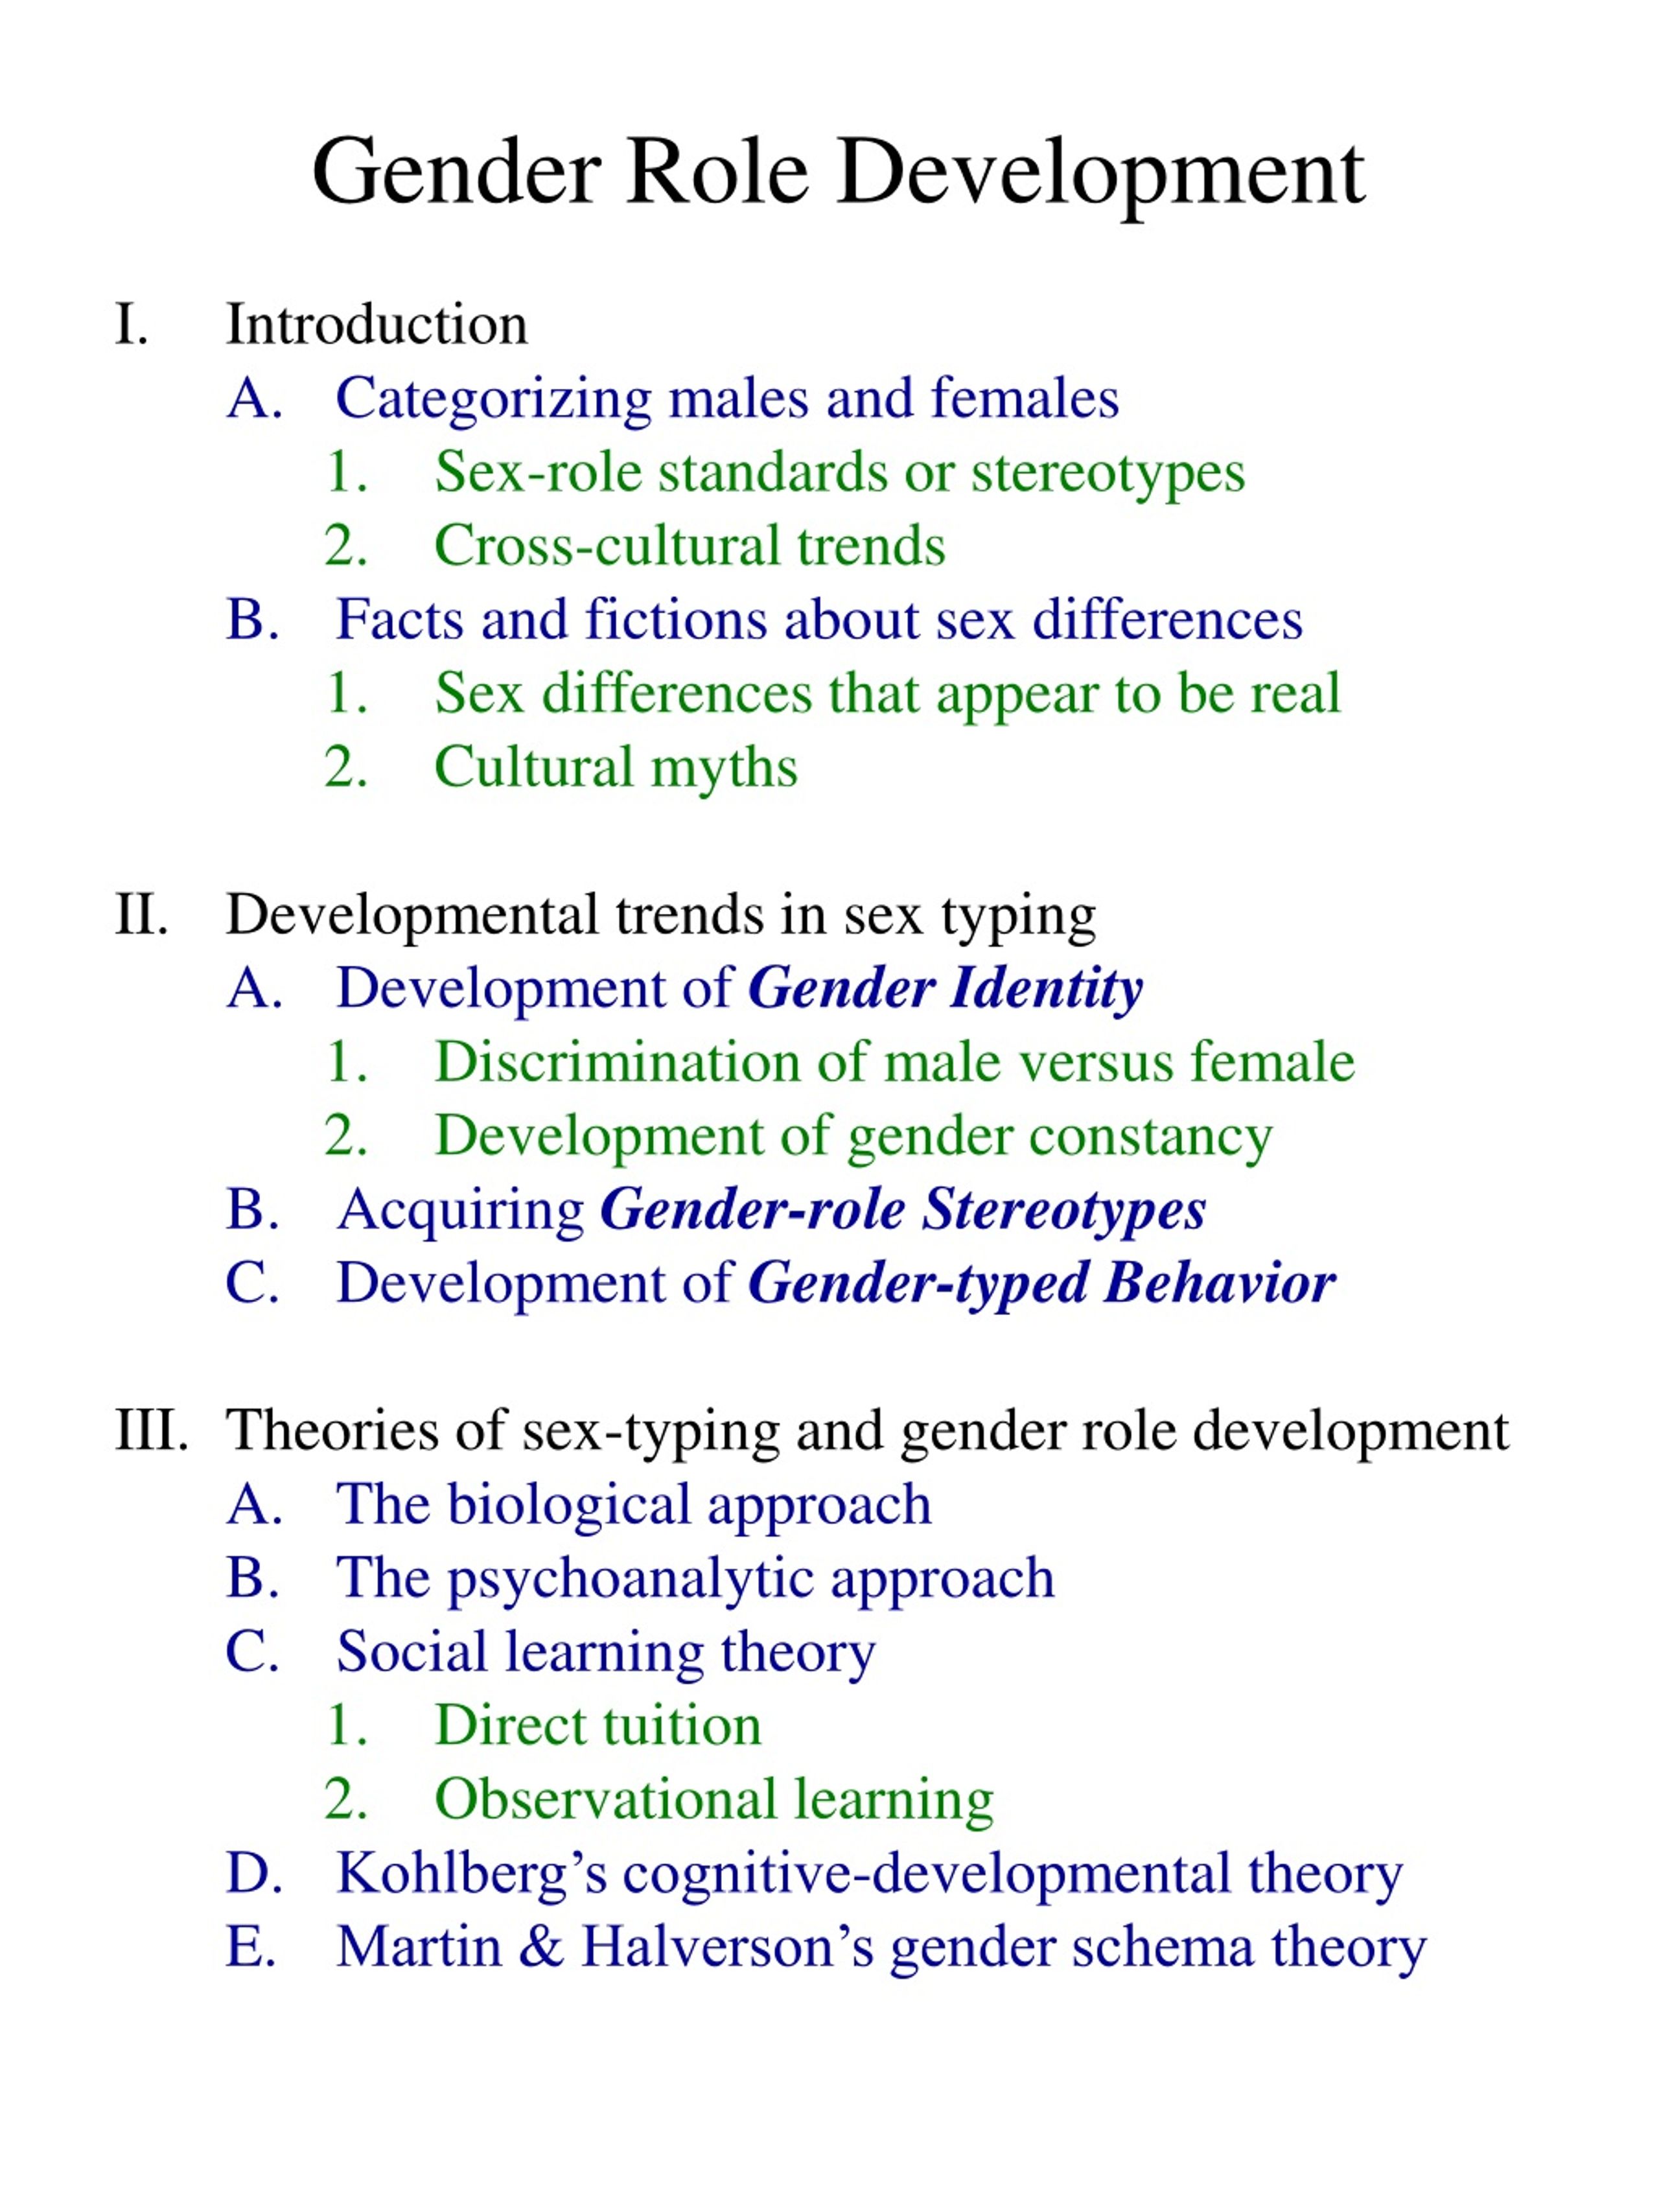 research topics about gender roles